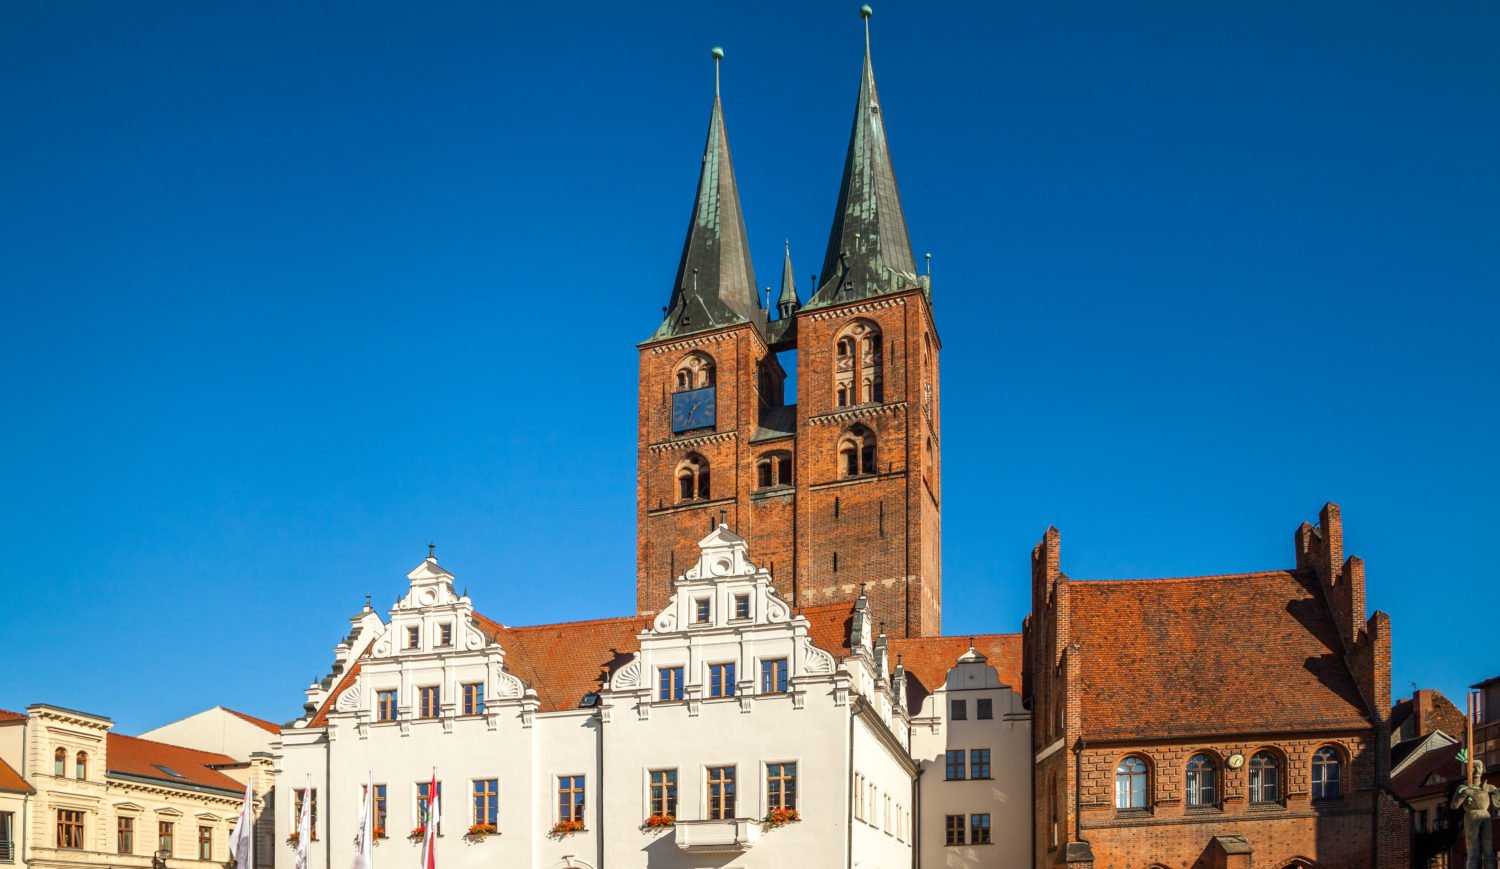 The Stendal town hall dates back to the 15th century. Something even older can be found in its interior: The oldest carved wall in Germany from 1462.